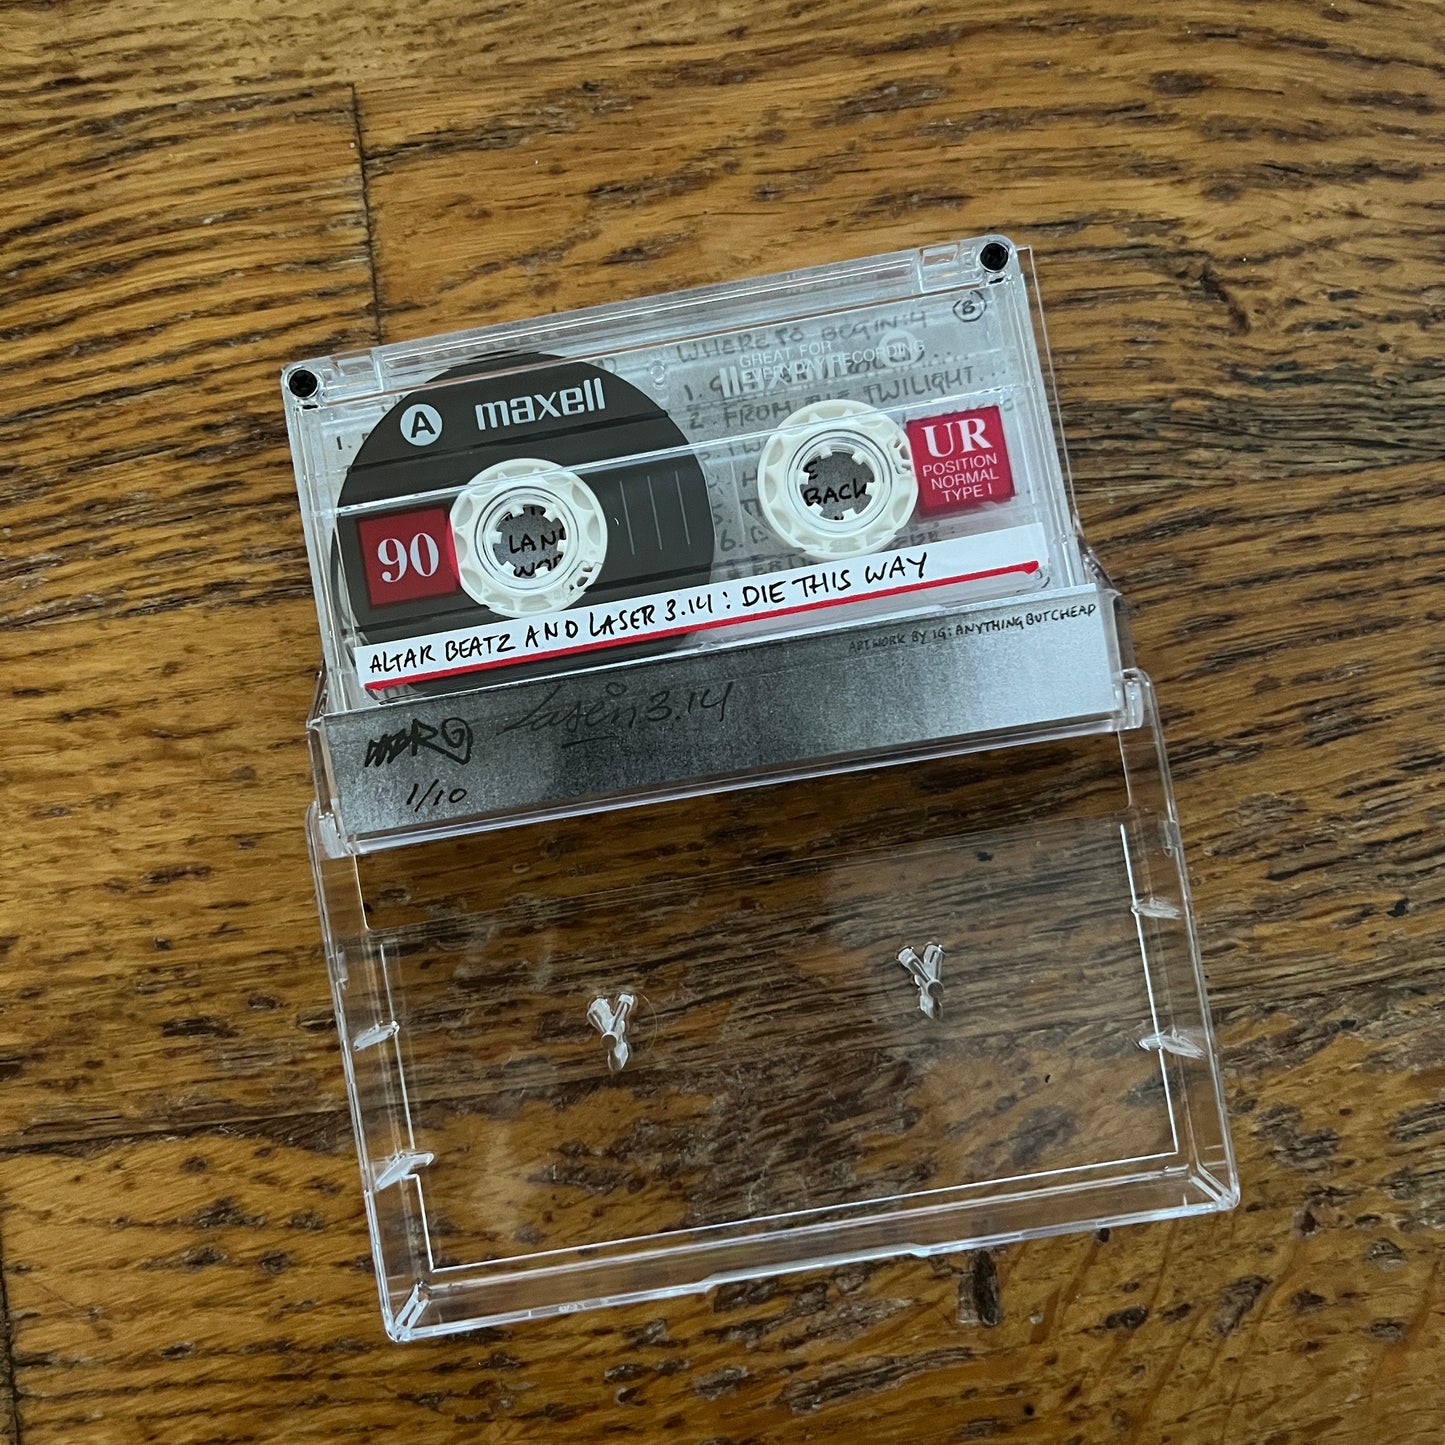 DIY Cassette Tape by Altar Beatz and Laser 3.14 - DIE THIS WAY 1/10